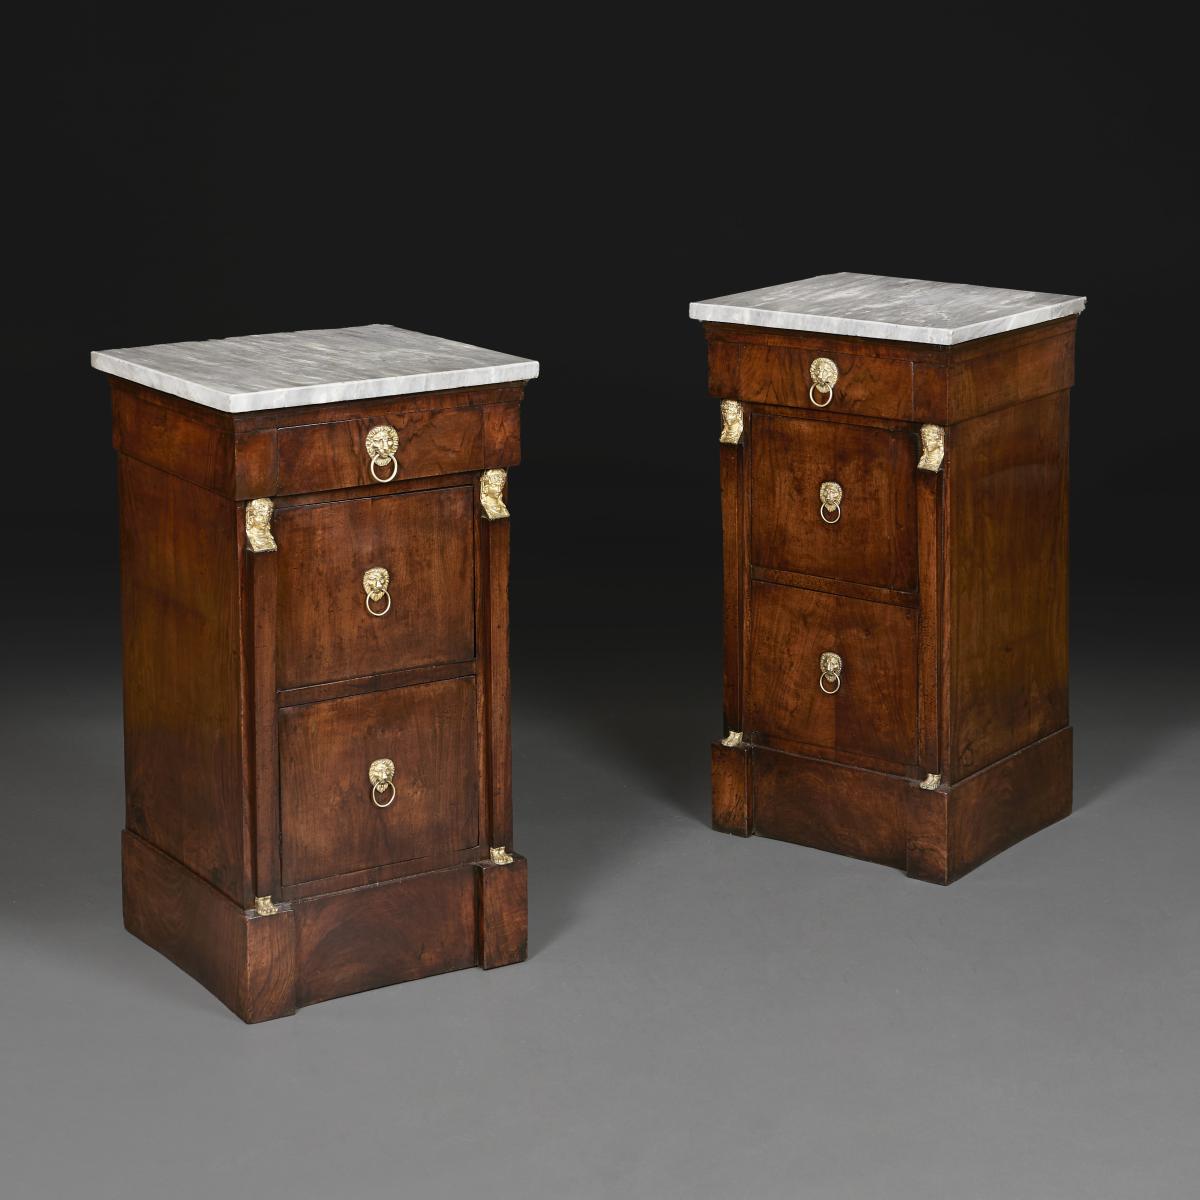 Pair of 19th Century Empire Bedside Cabinets